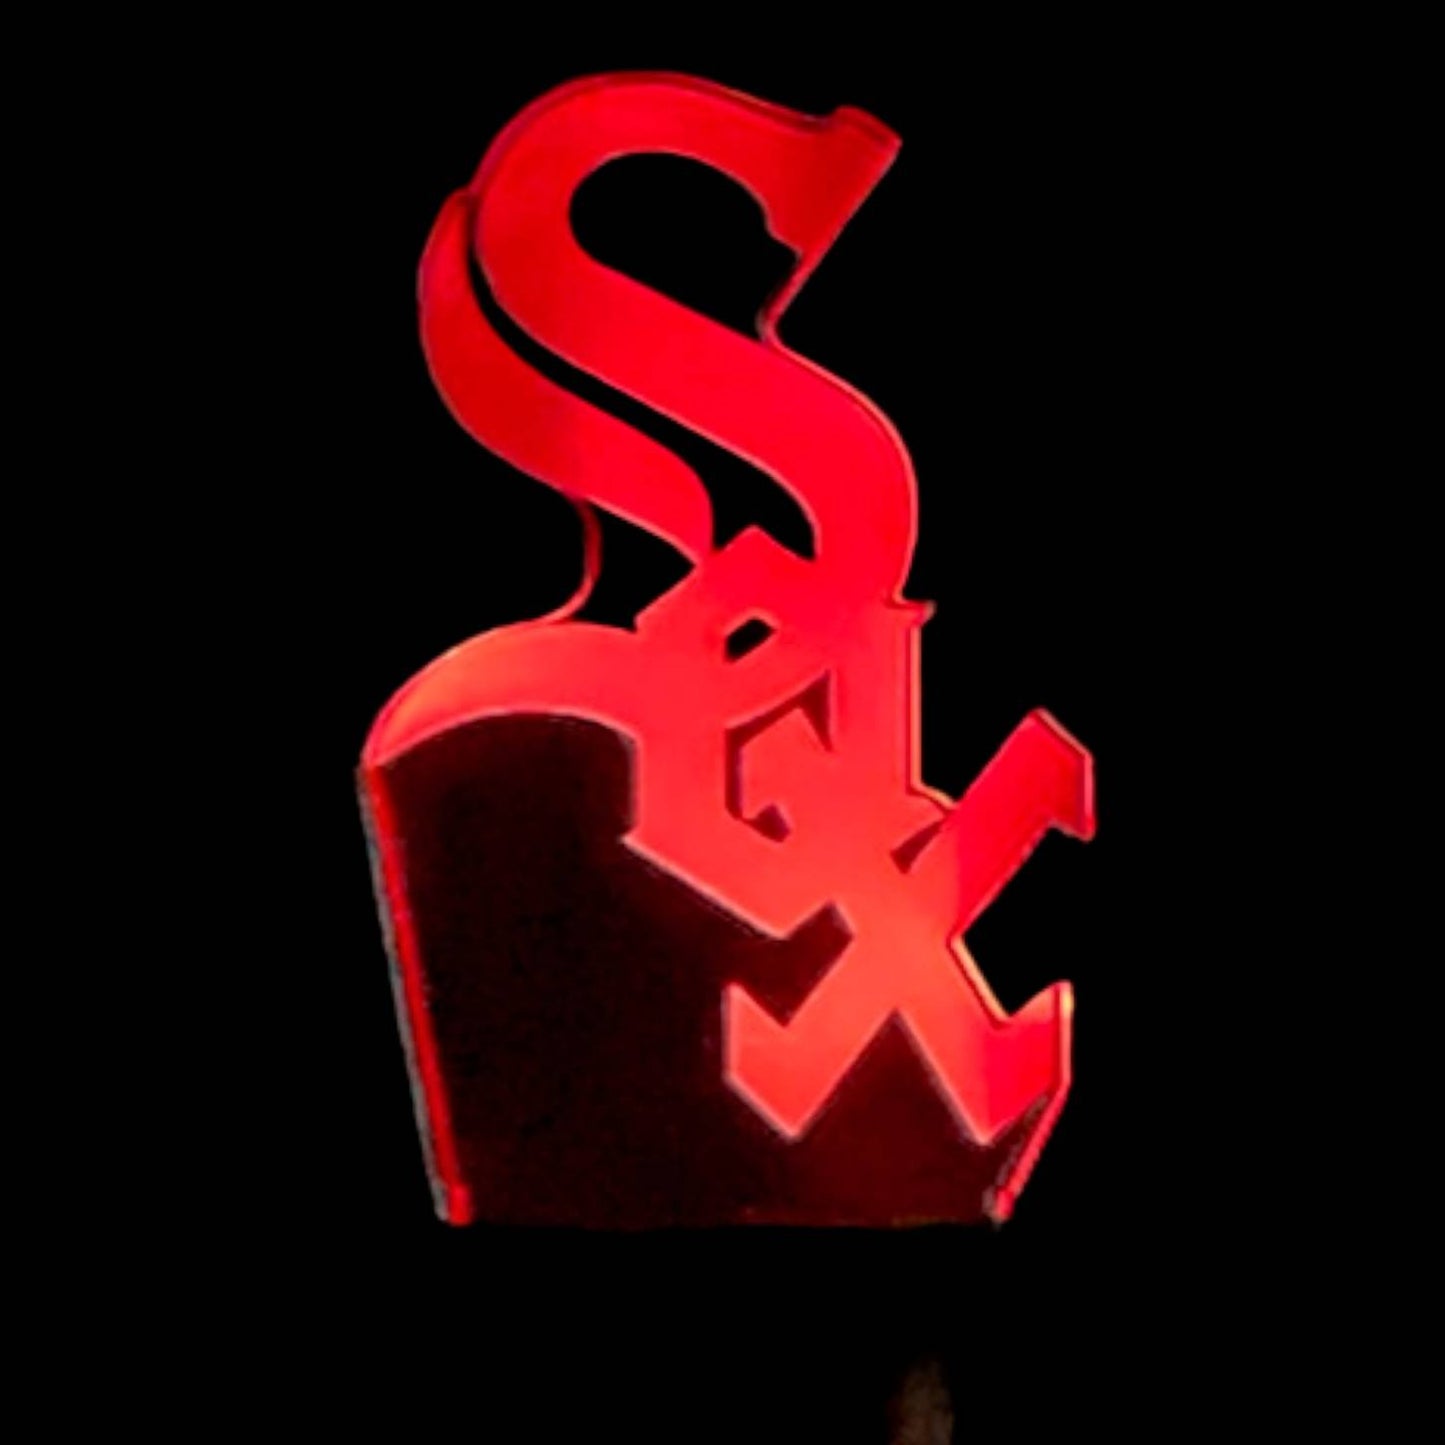 Chicago White Sox 3D LED Night-Light 7 Color Changing Lamp w/ Touch Switch